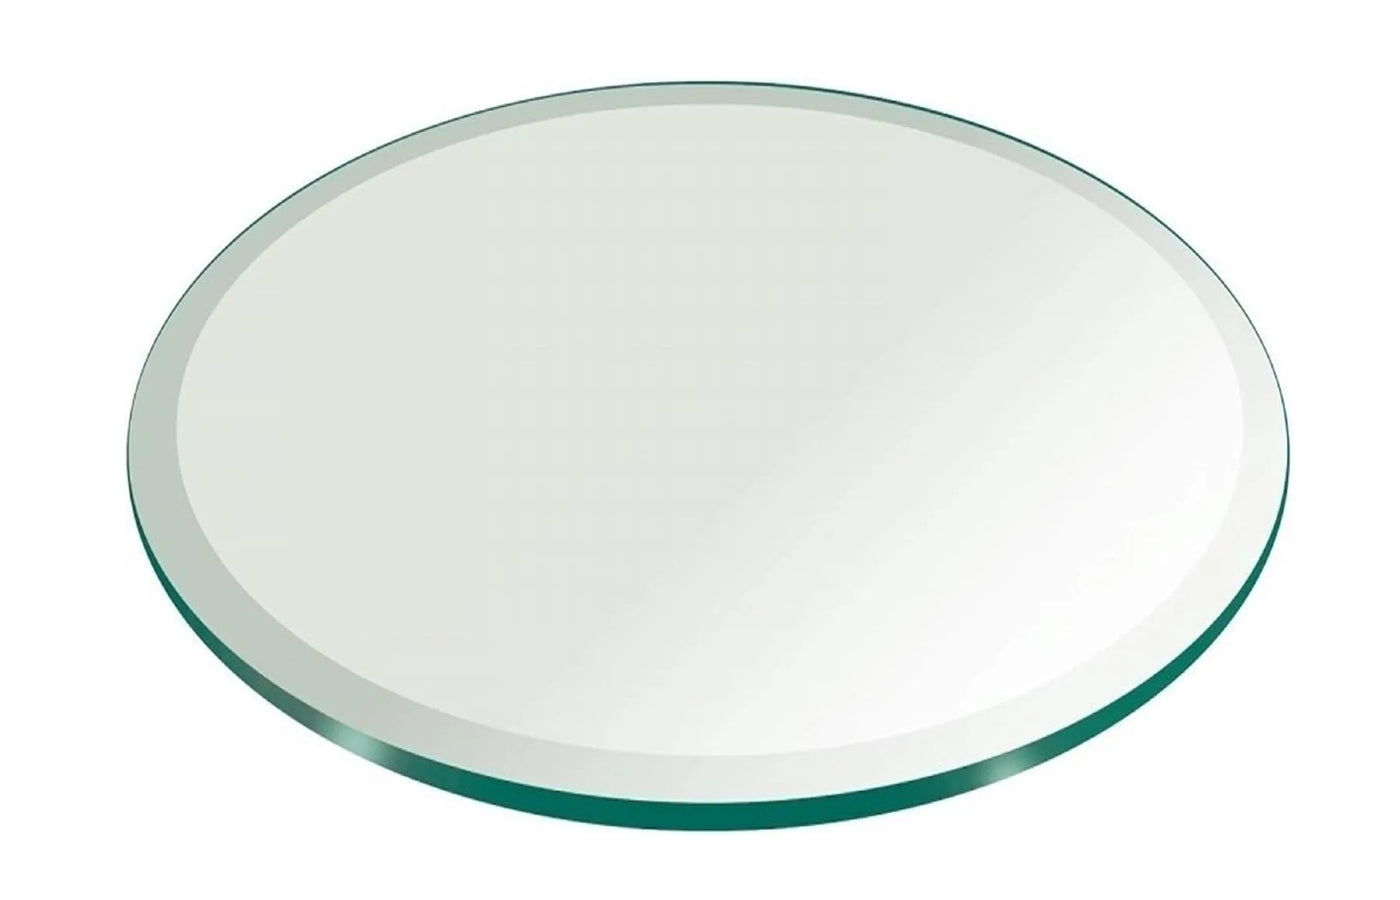 WIsdomFur 30" Round Tempered Glass Shelf Panel Table Top Clear